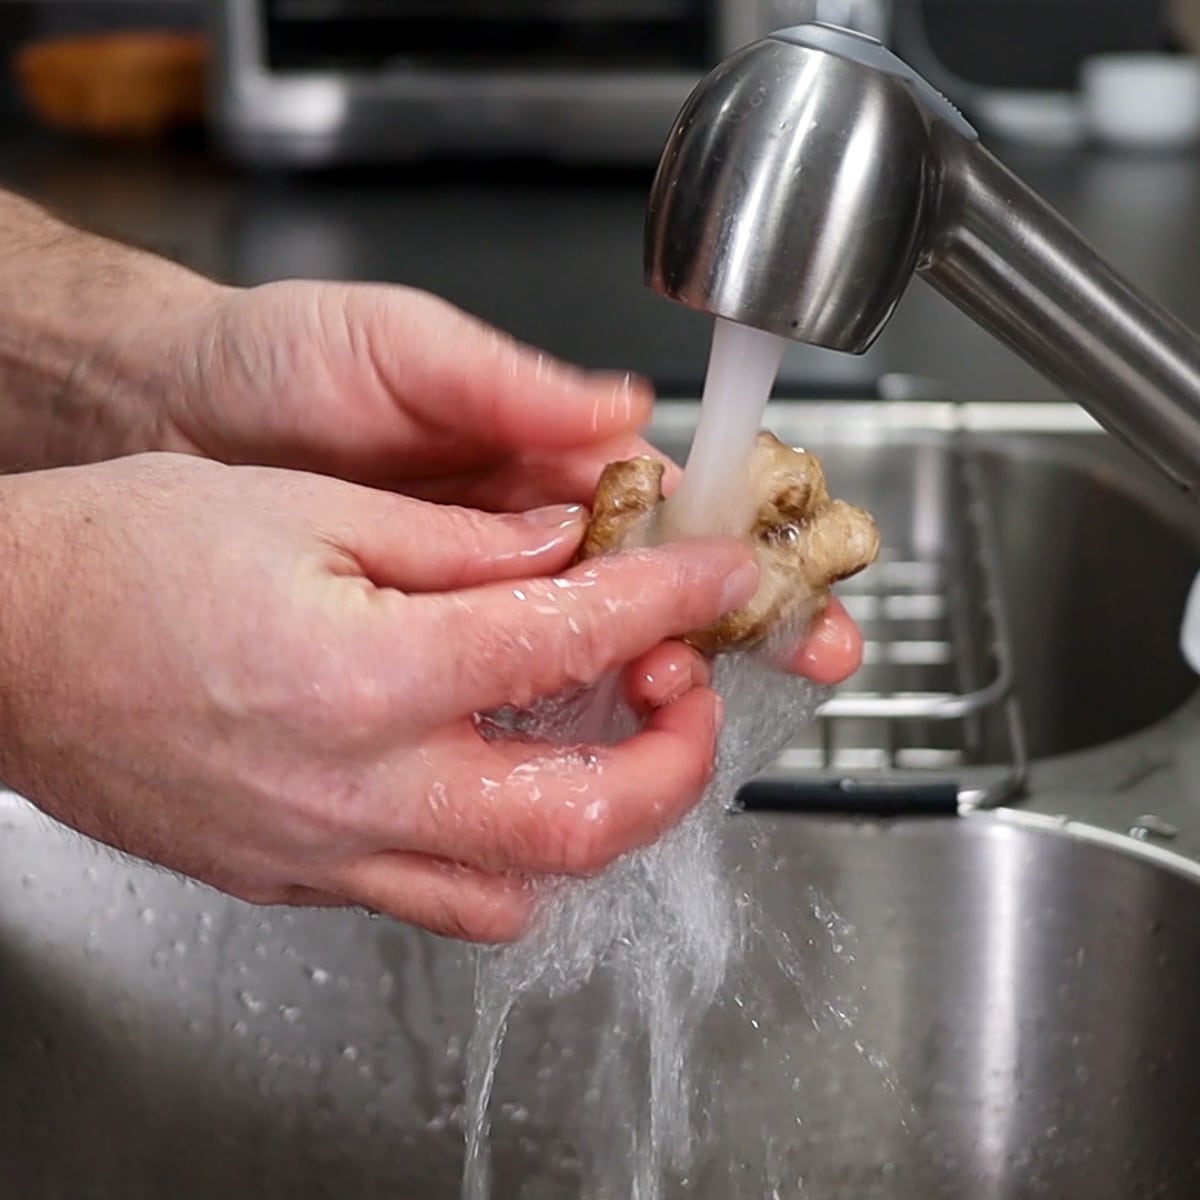 washing ginger under faucet with cold water
